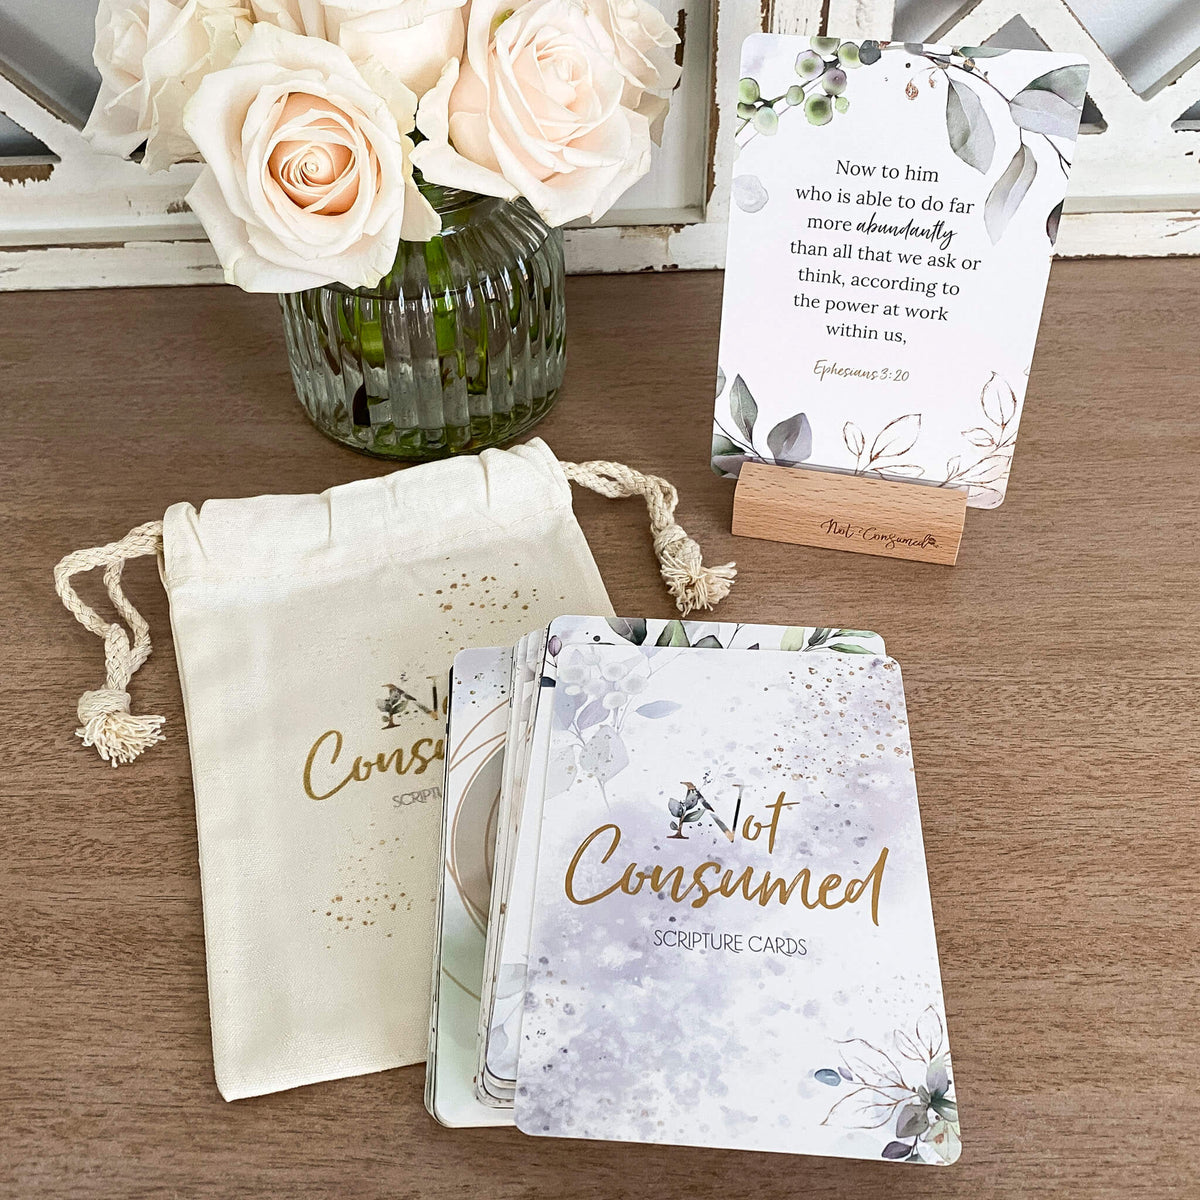 #NC Scripture Cards by Not Consumed